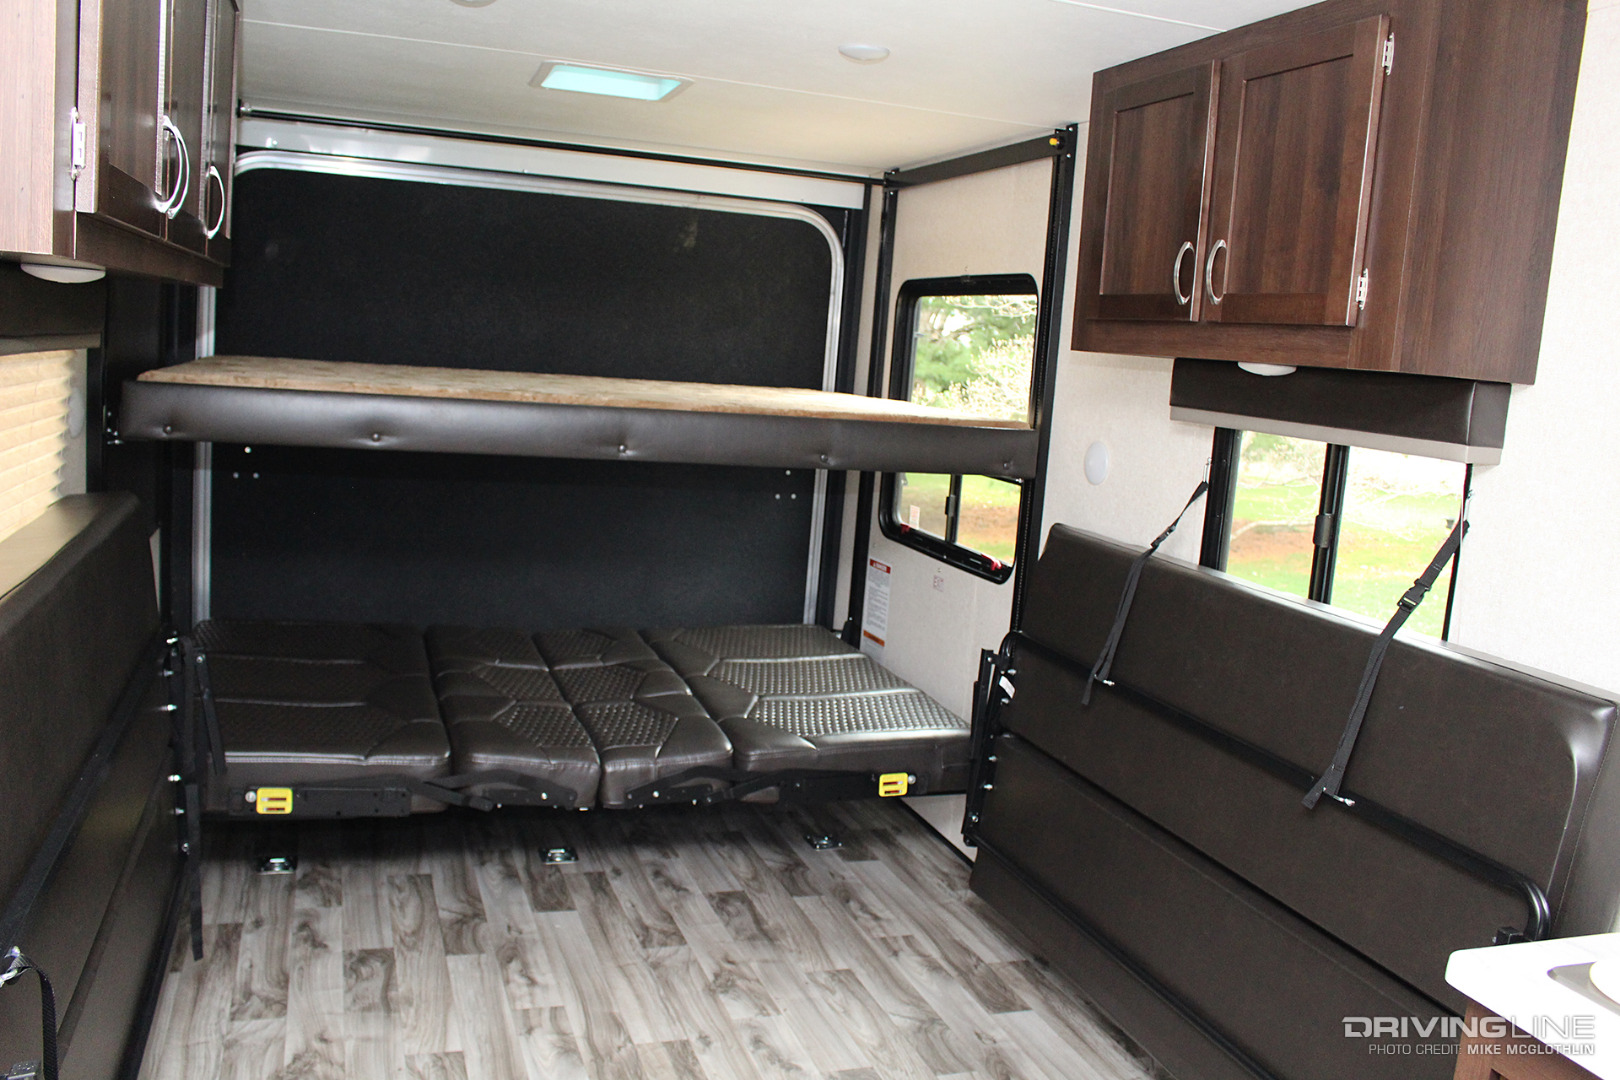 Toy Hauler Bunk Beds | Wow Blog Travel Trailer Toy Hauler With Bunk Beds